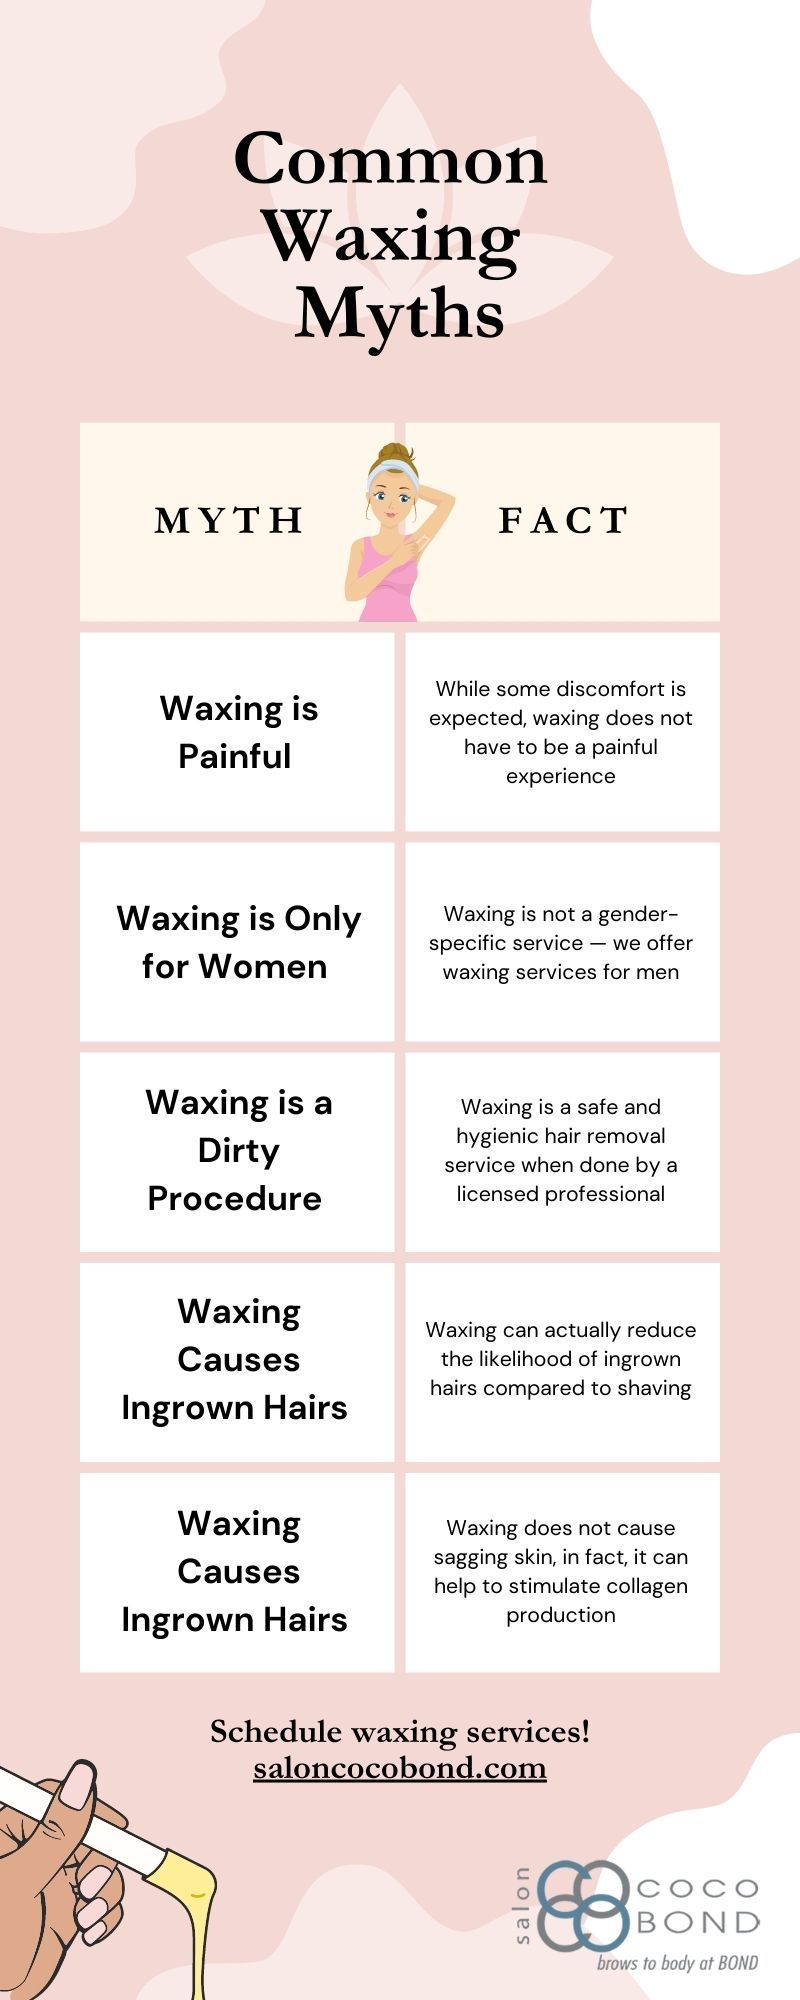 M35192 - Infographic - Common Waxing Myths.jpg